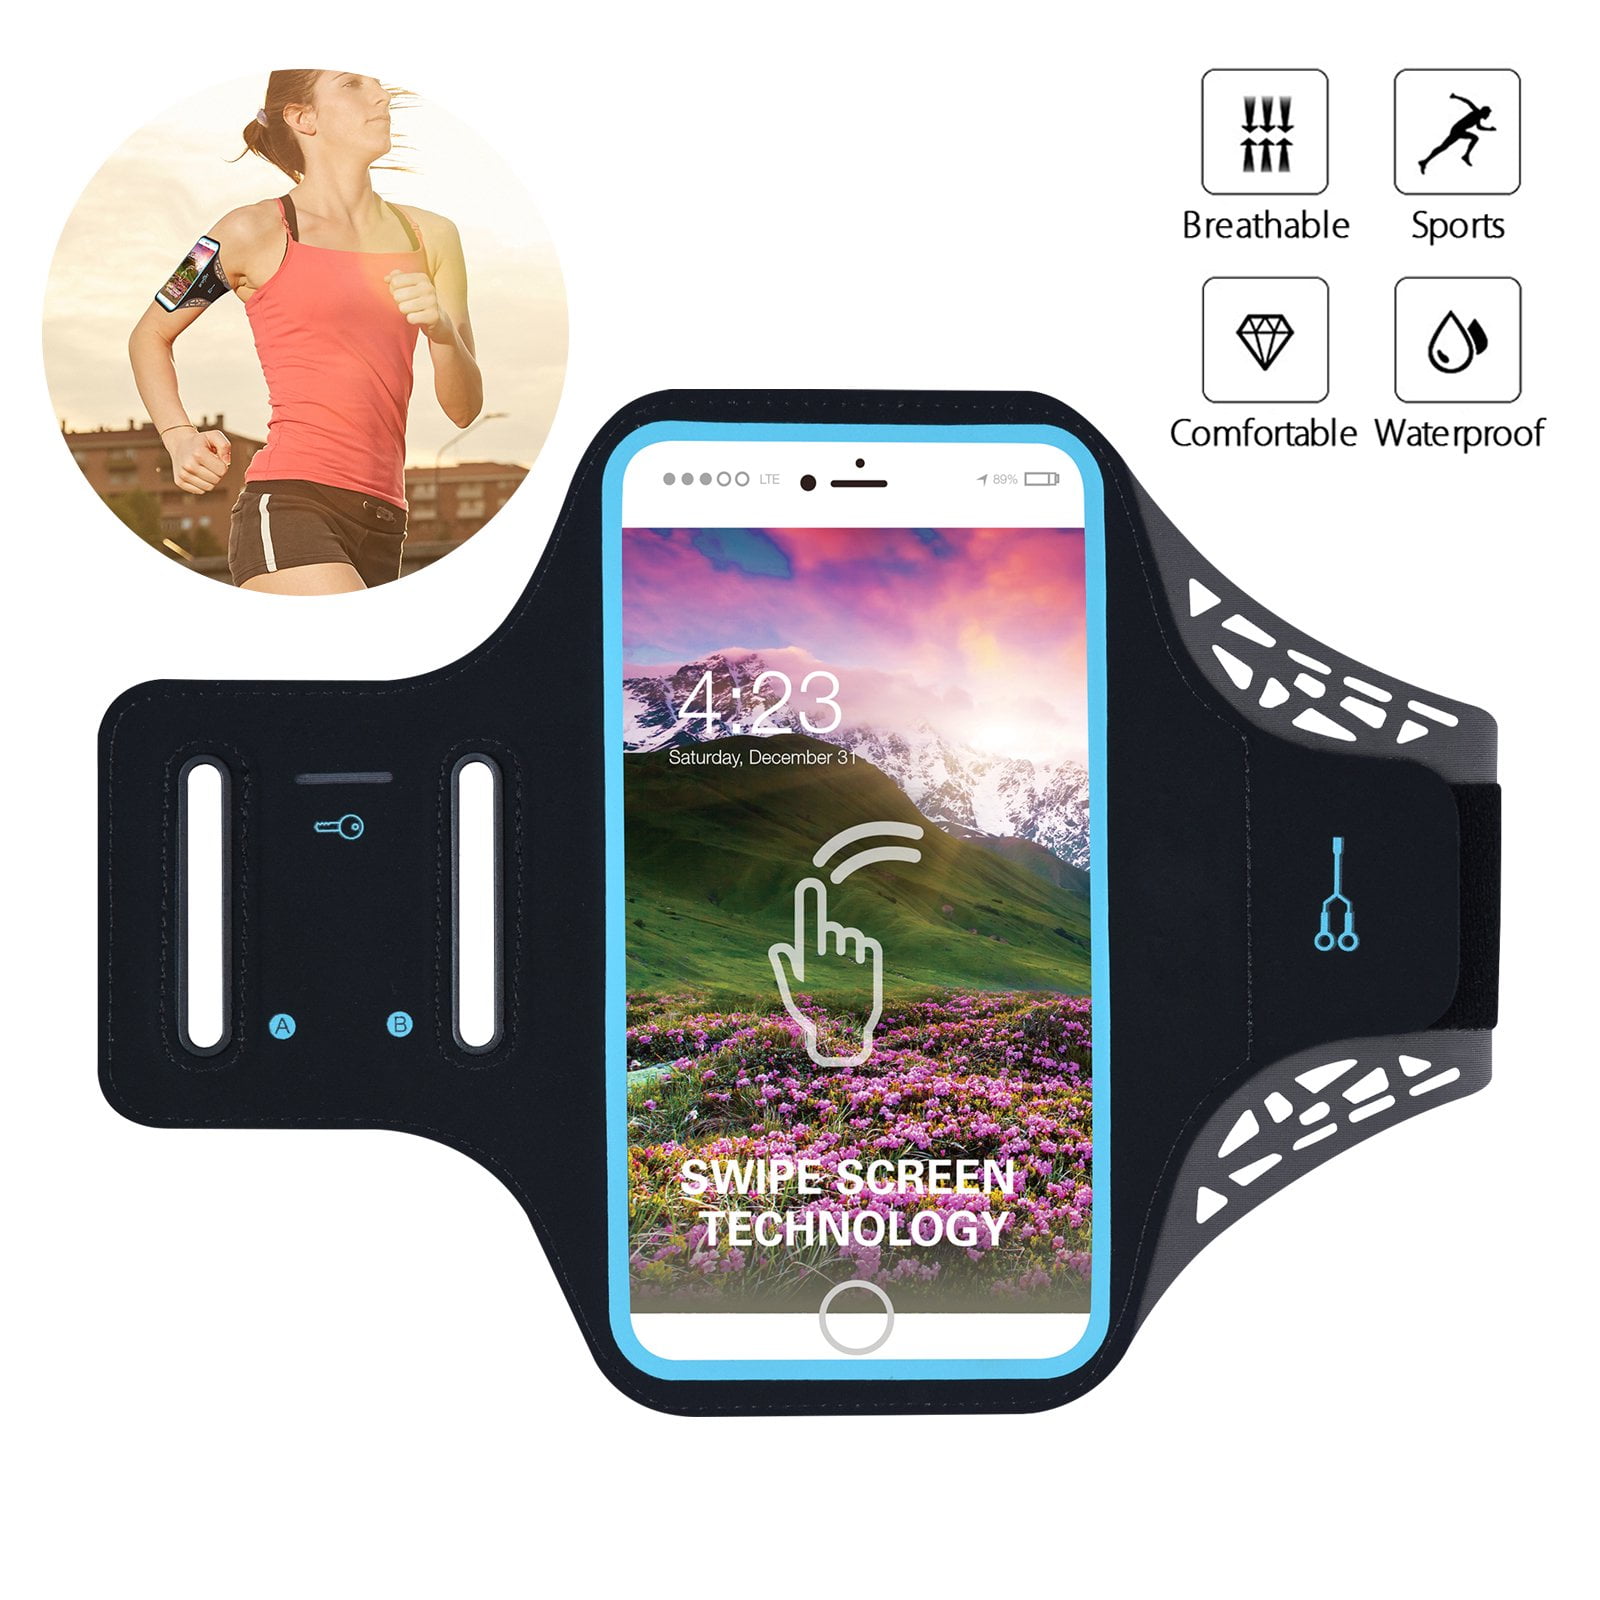 ARMBAND CASE COVER for iPhone 4/5/6/SE/7/8/X BLUETOOTH Heart Rate Monitor 